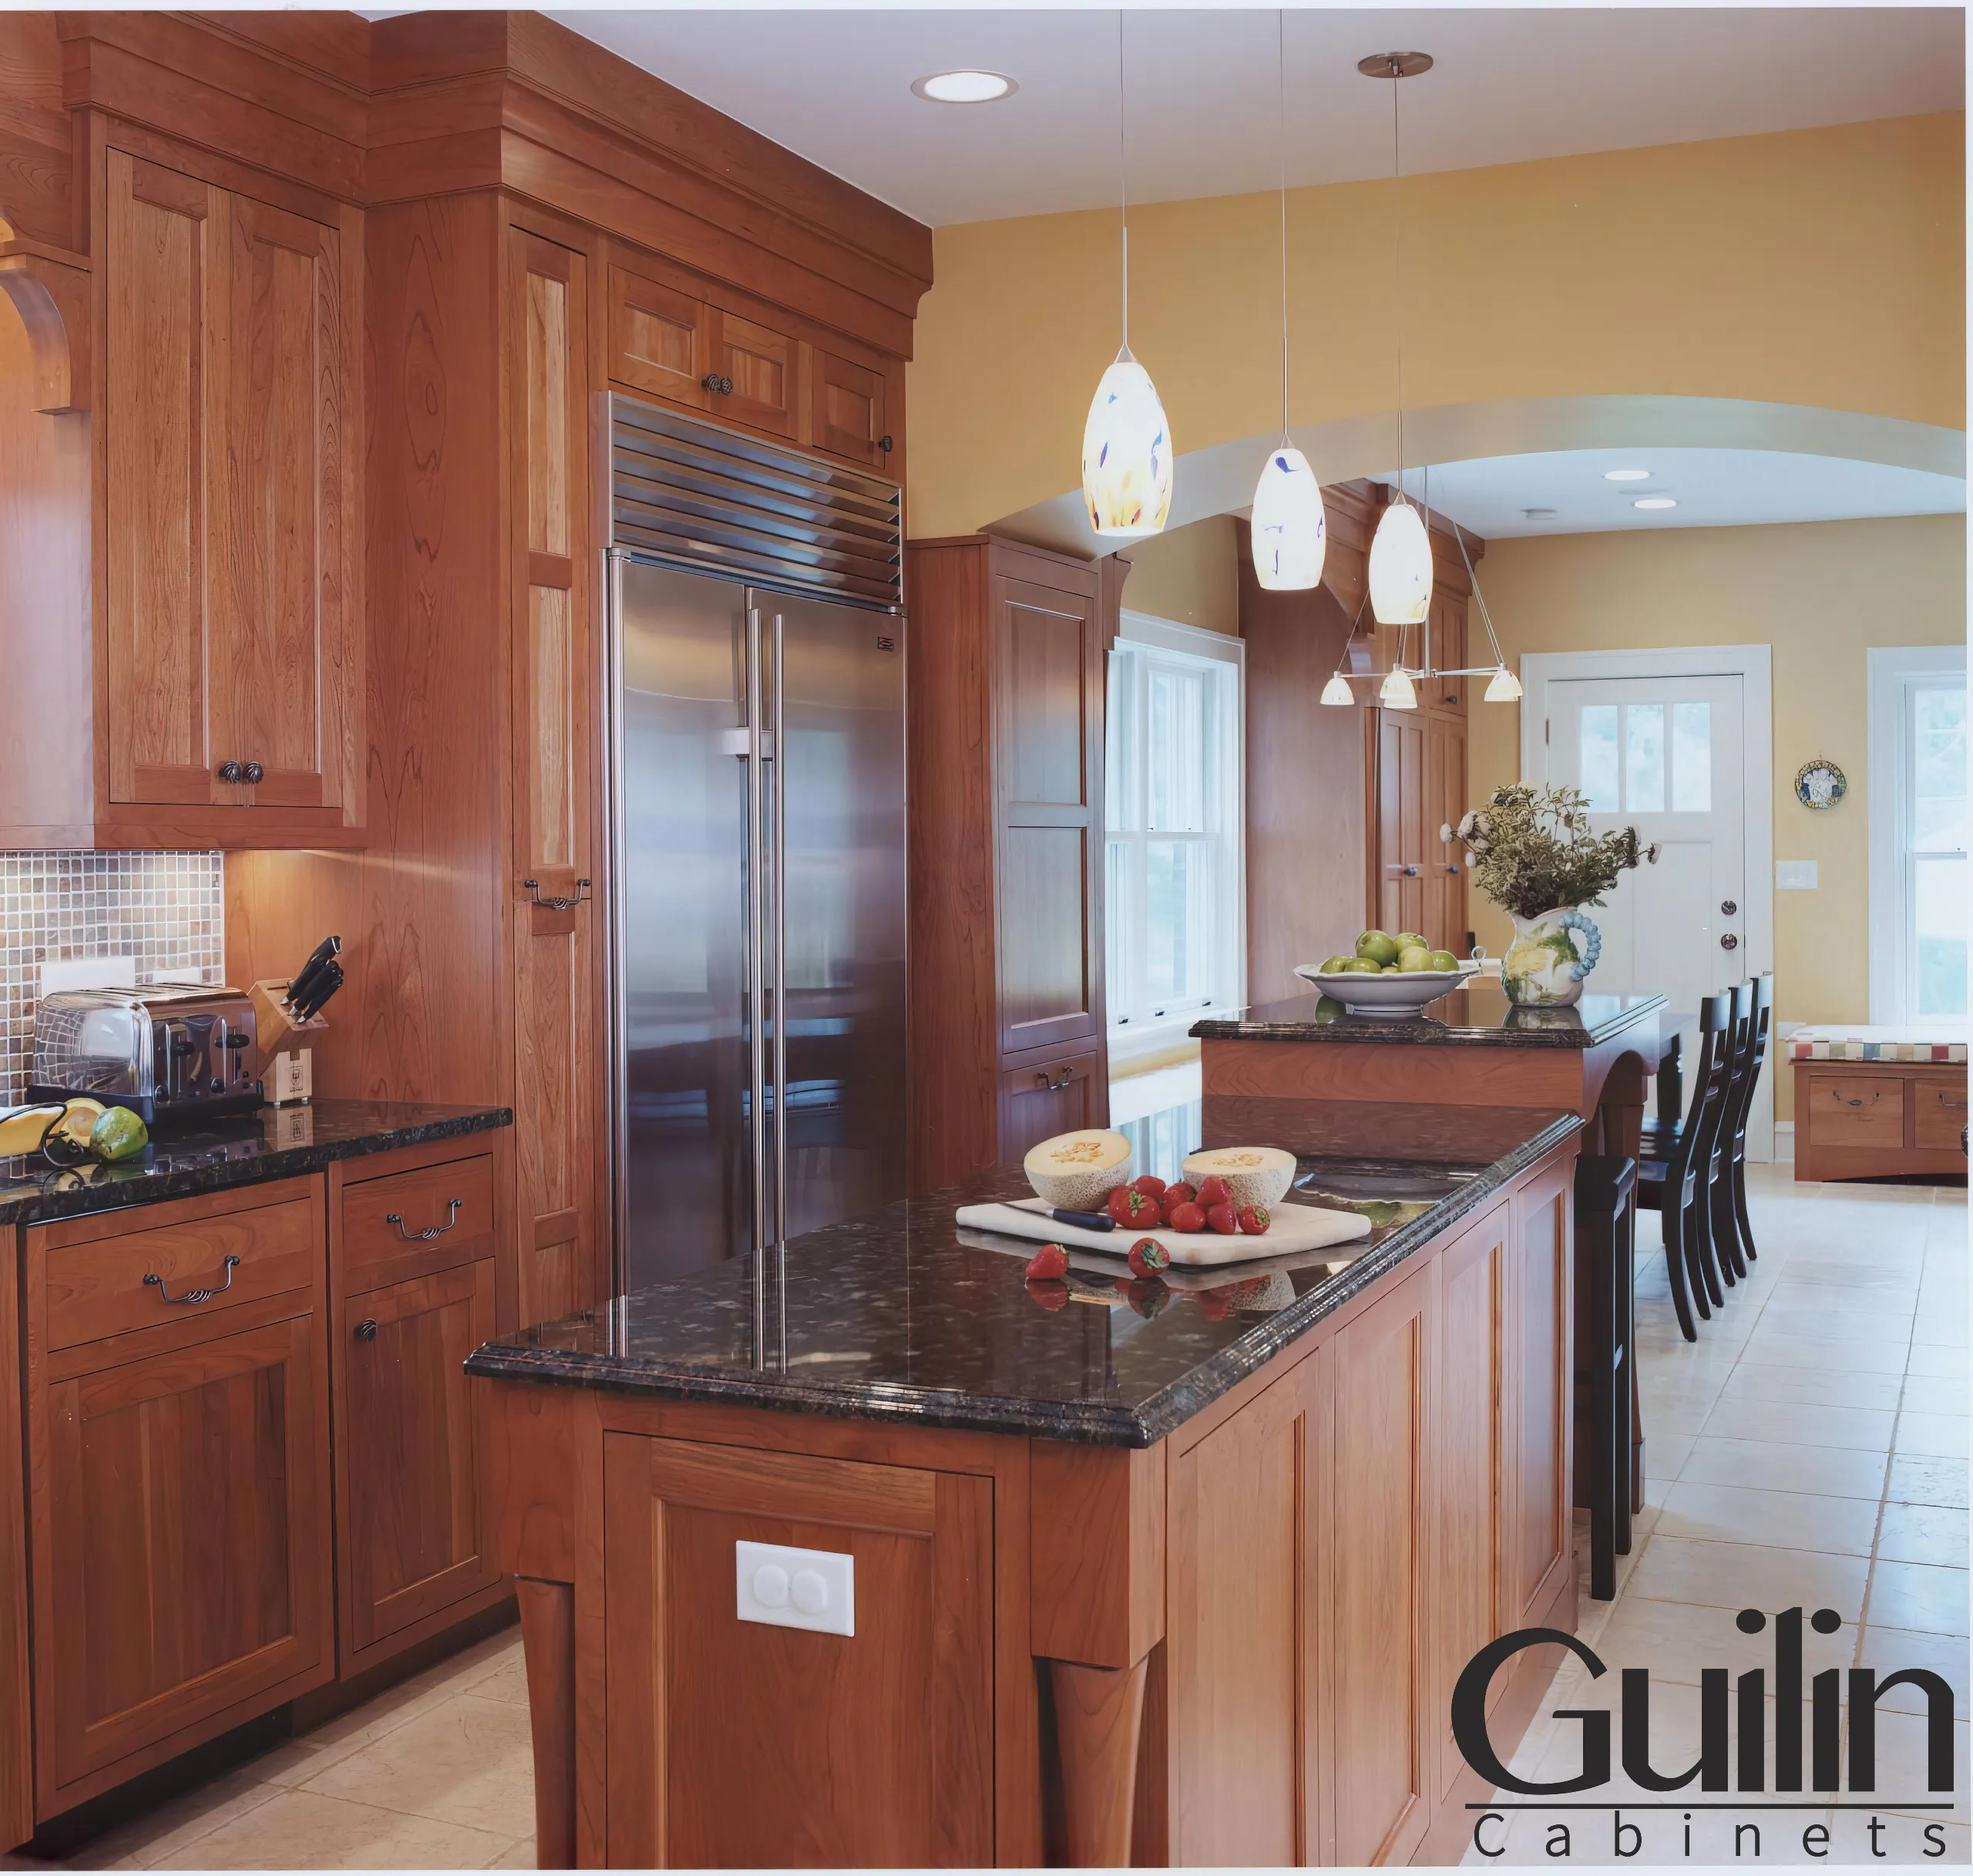 With Properly maintained, solid wood cabinets can last for decades without needing to be replaced. 